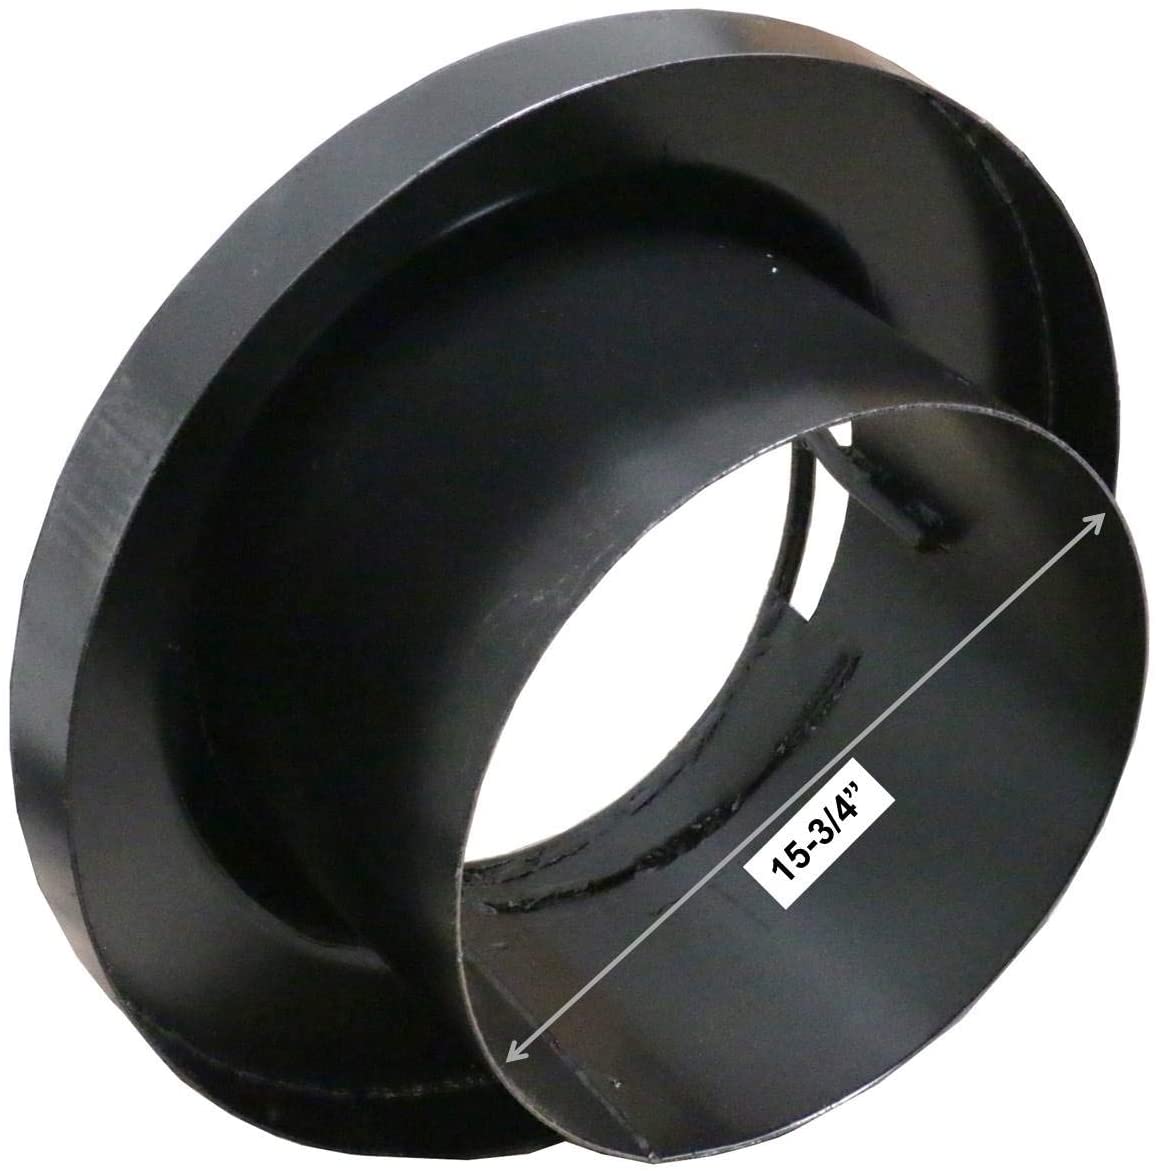 Leyso Chinese Wok Range Adapter/Reducer with Welded Ring - Convert The Large Wok Well to Smaller Size (22" to 16")